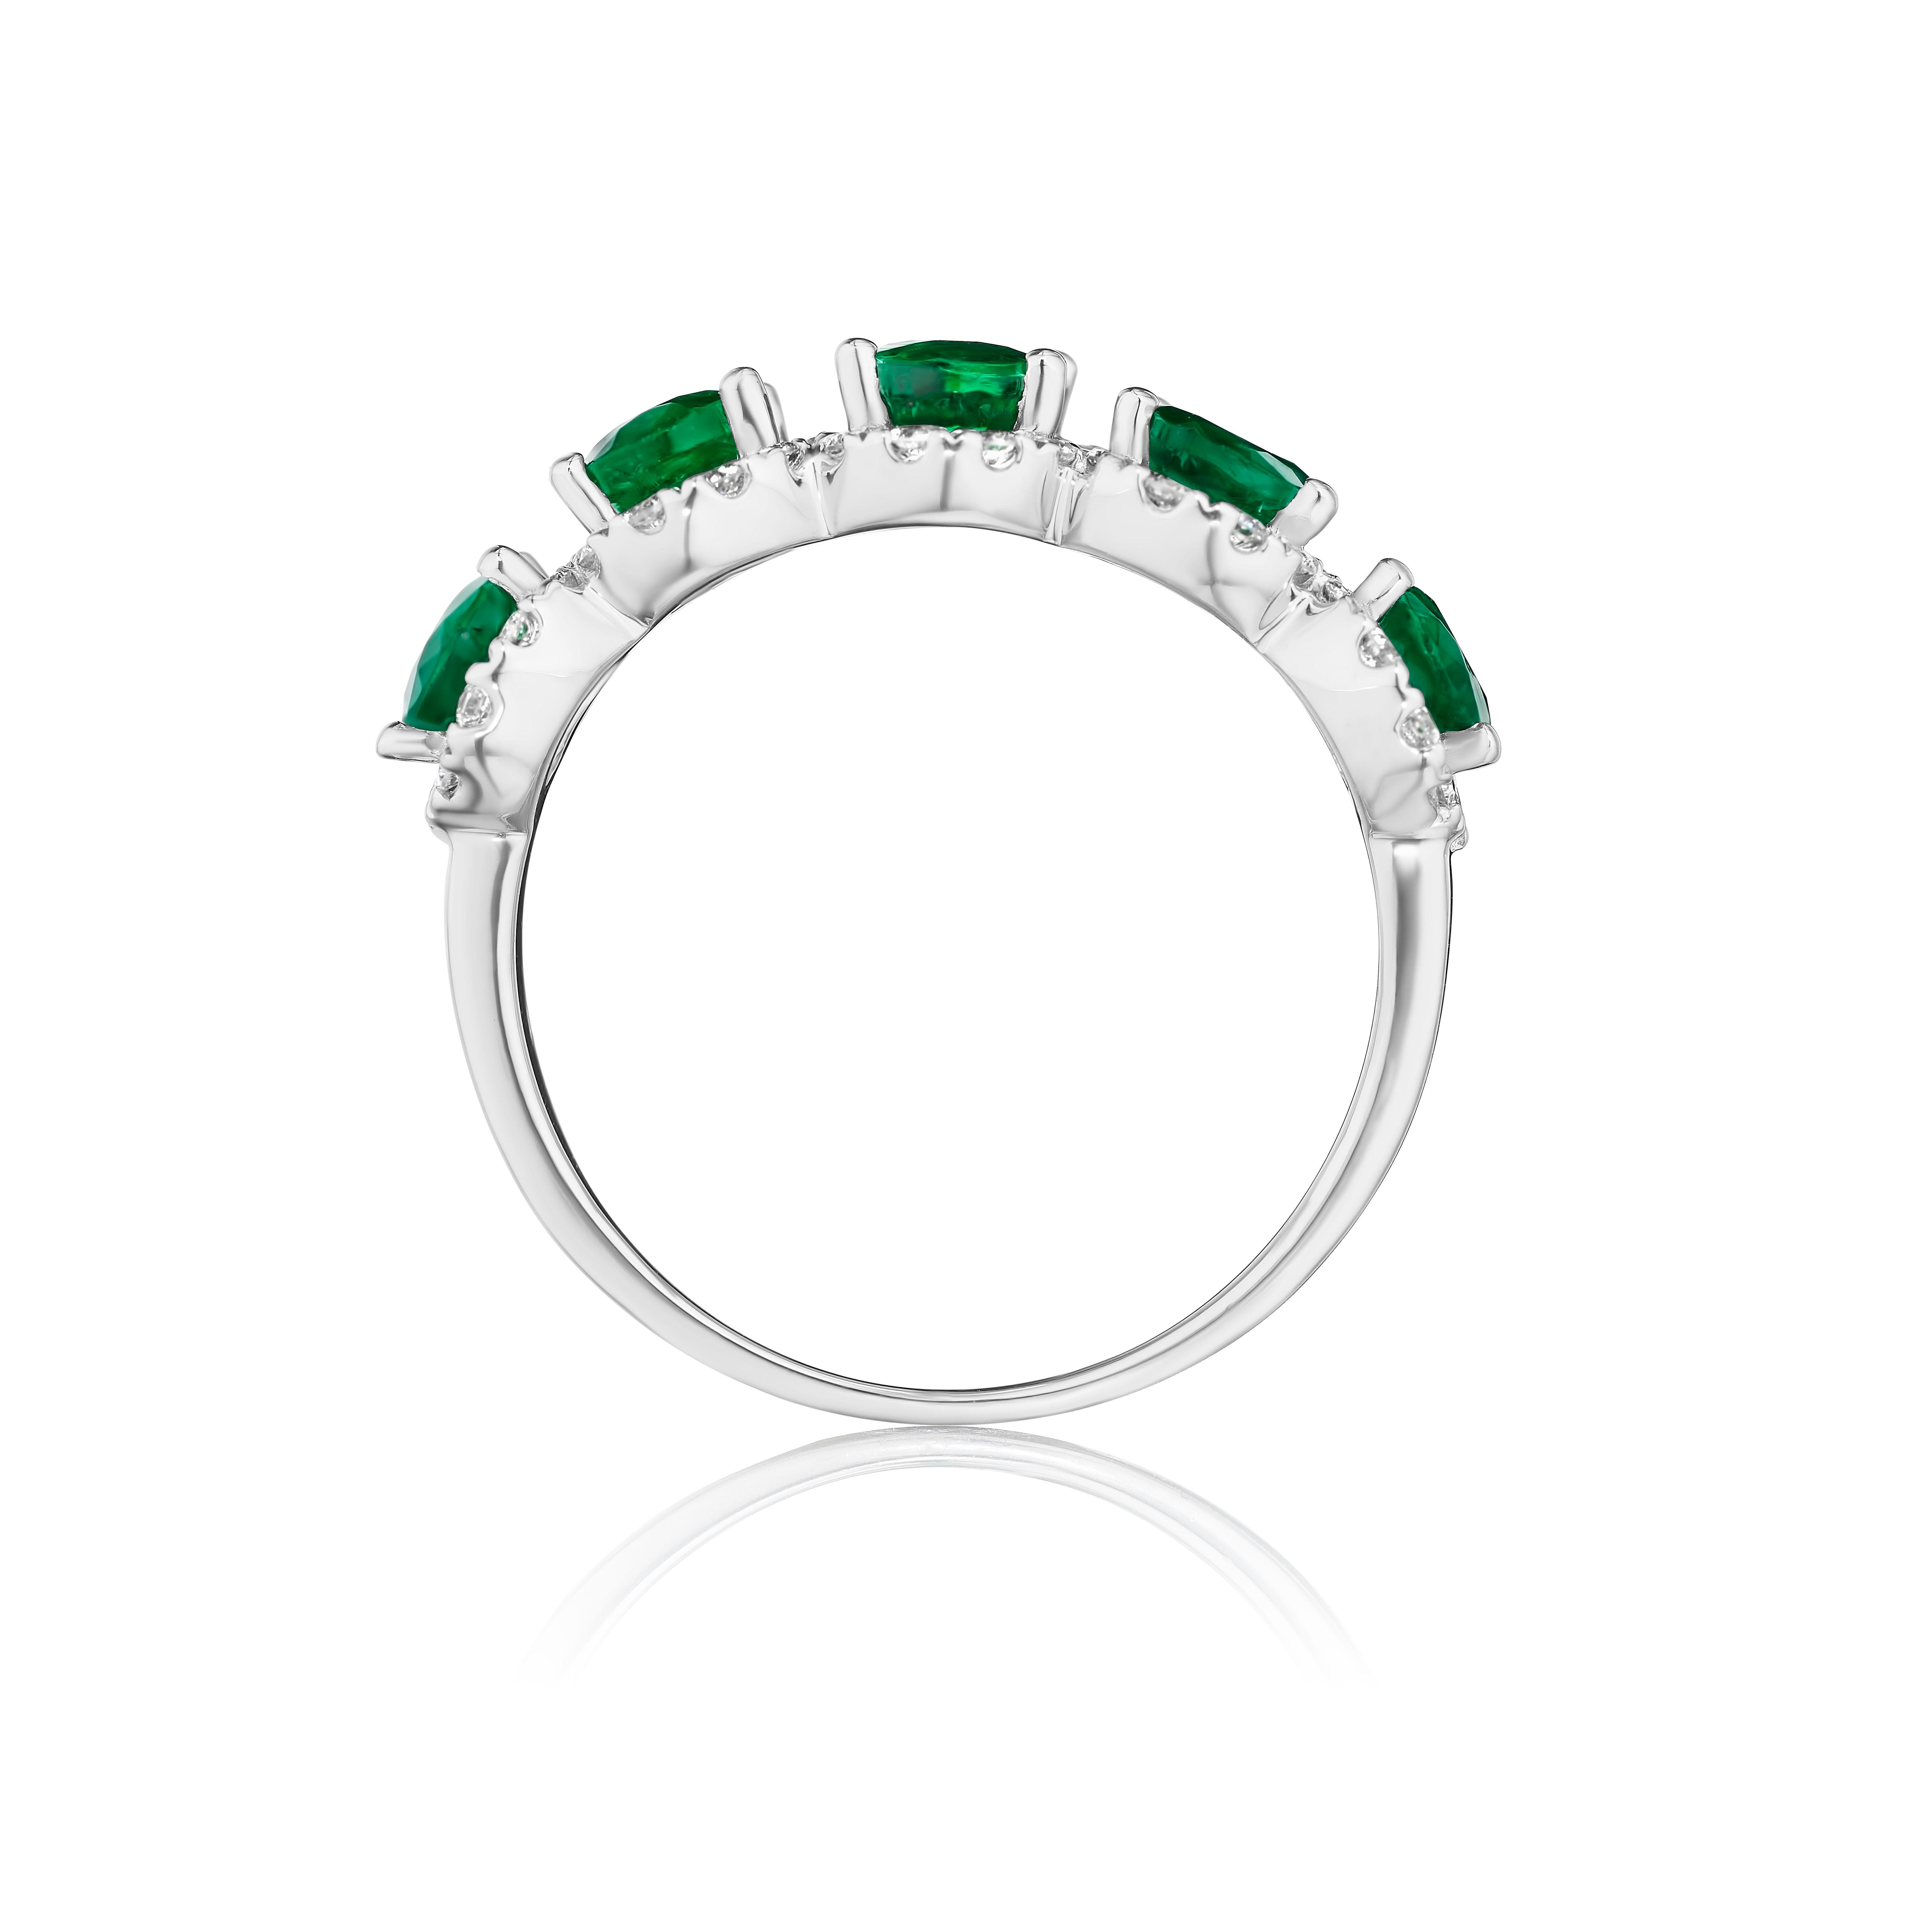 • Crafted in 14KT gold, this band is made with 5 oval cut green emeralds which are framed by a delicate halo comprised of round brilliant cut diamonds. The band has a combining total weight of approximately 3.55 carats. 

Worn beautifully on its